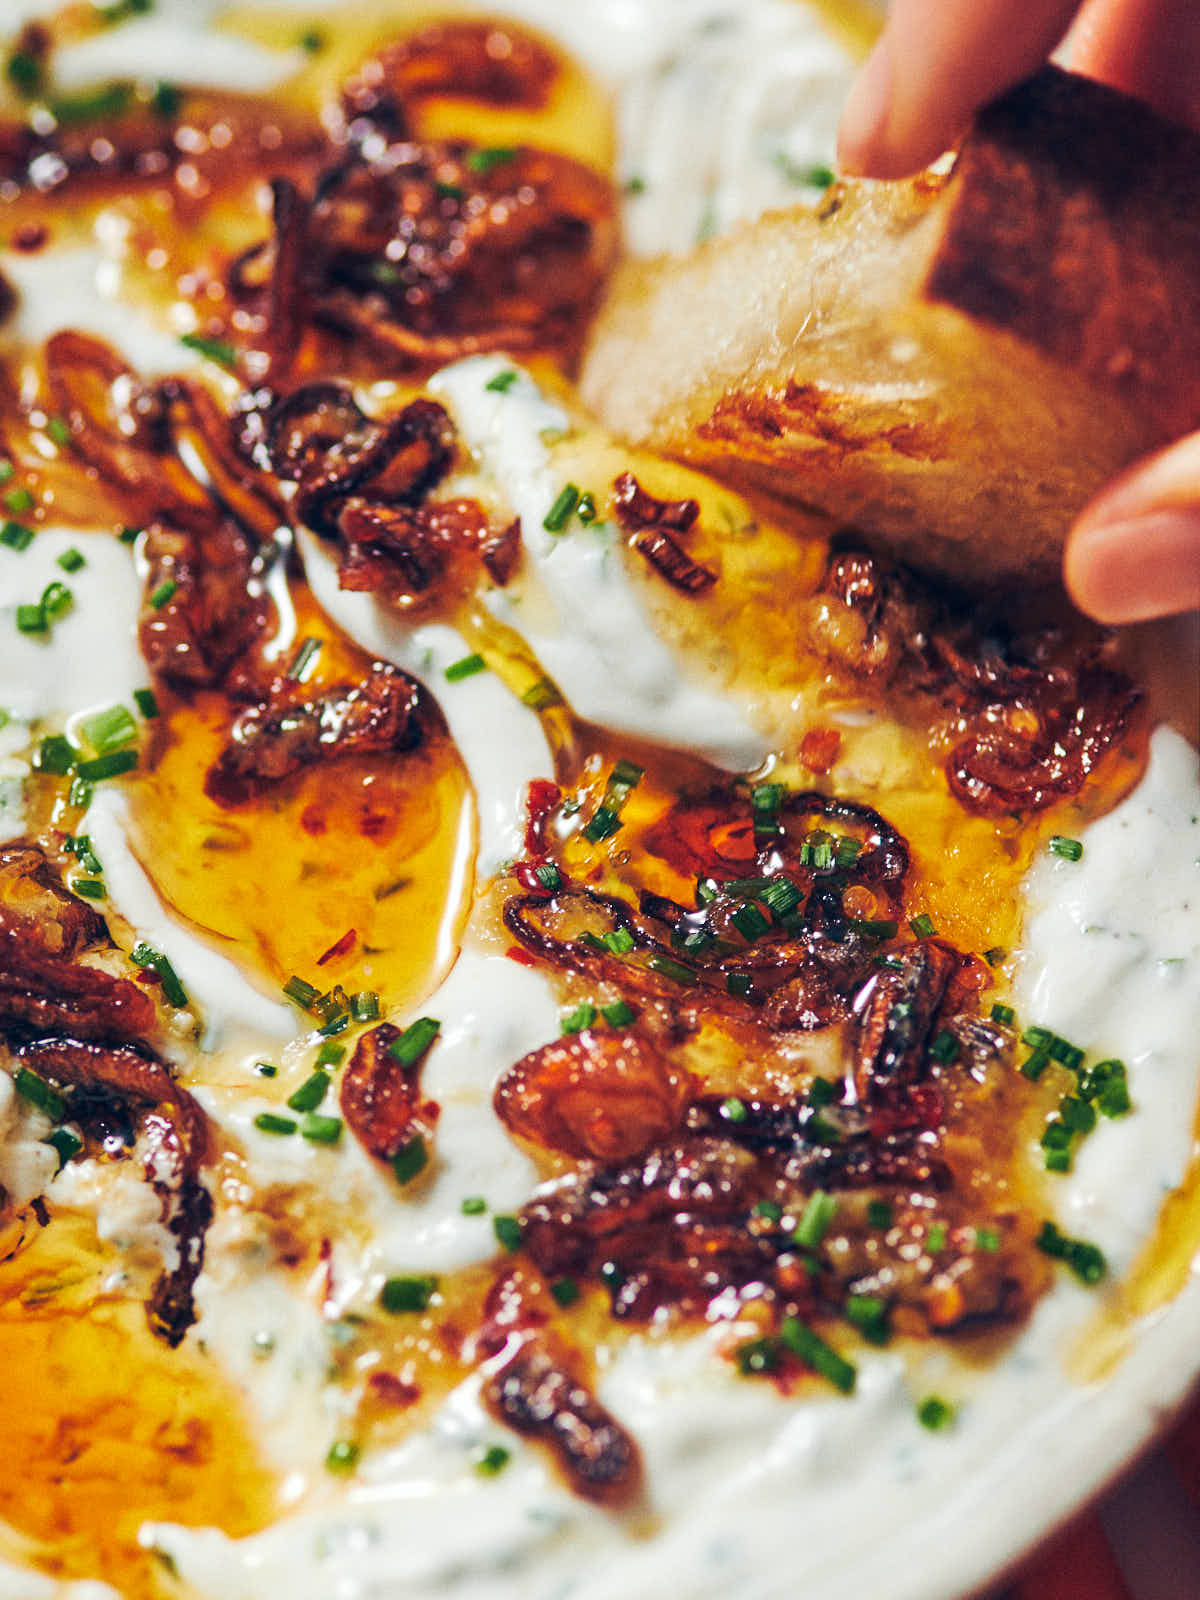 A piece of grilled bread being dipped into Greek yogurt onion dip with chili garlic oil and fried shallots